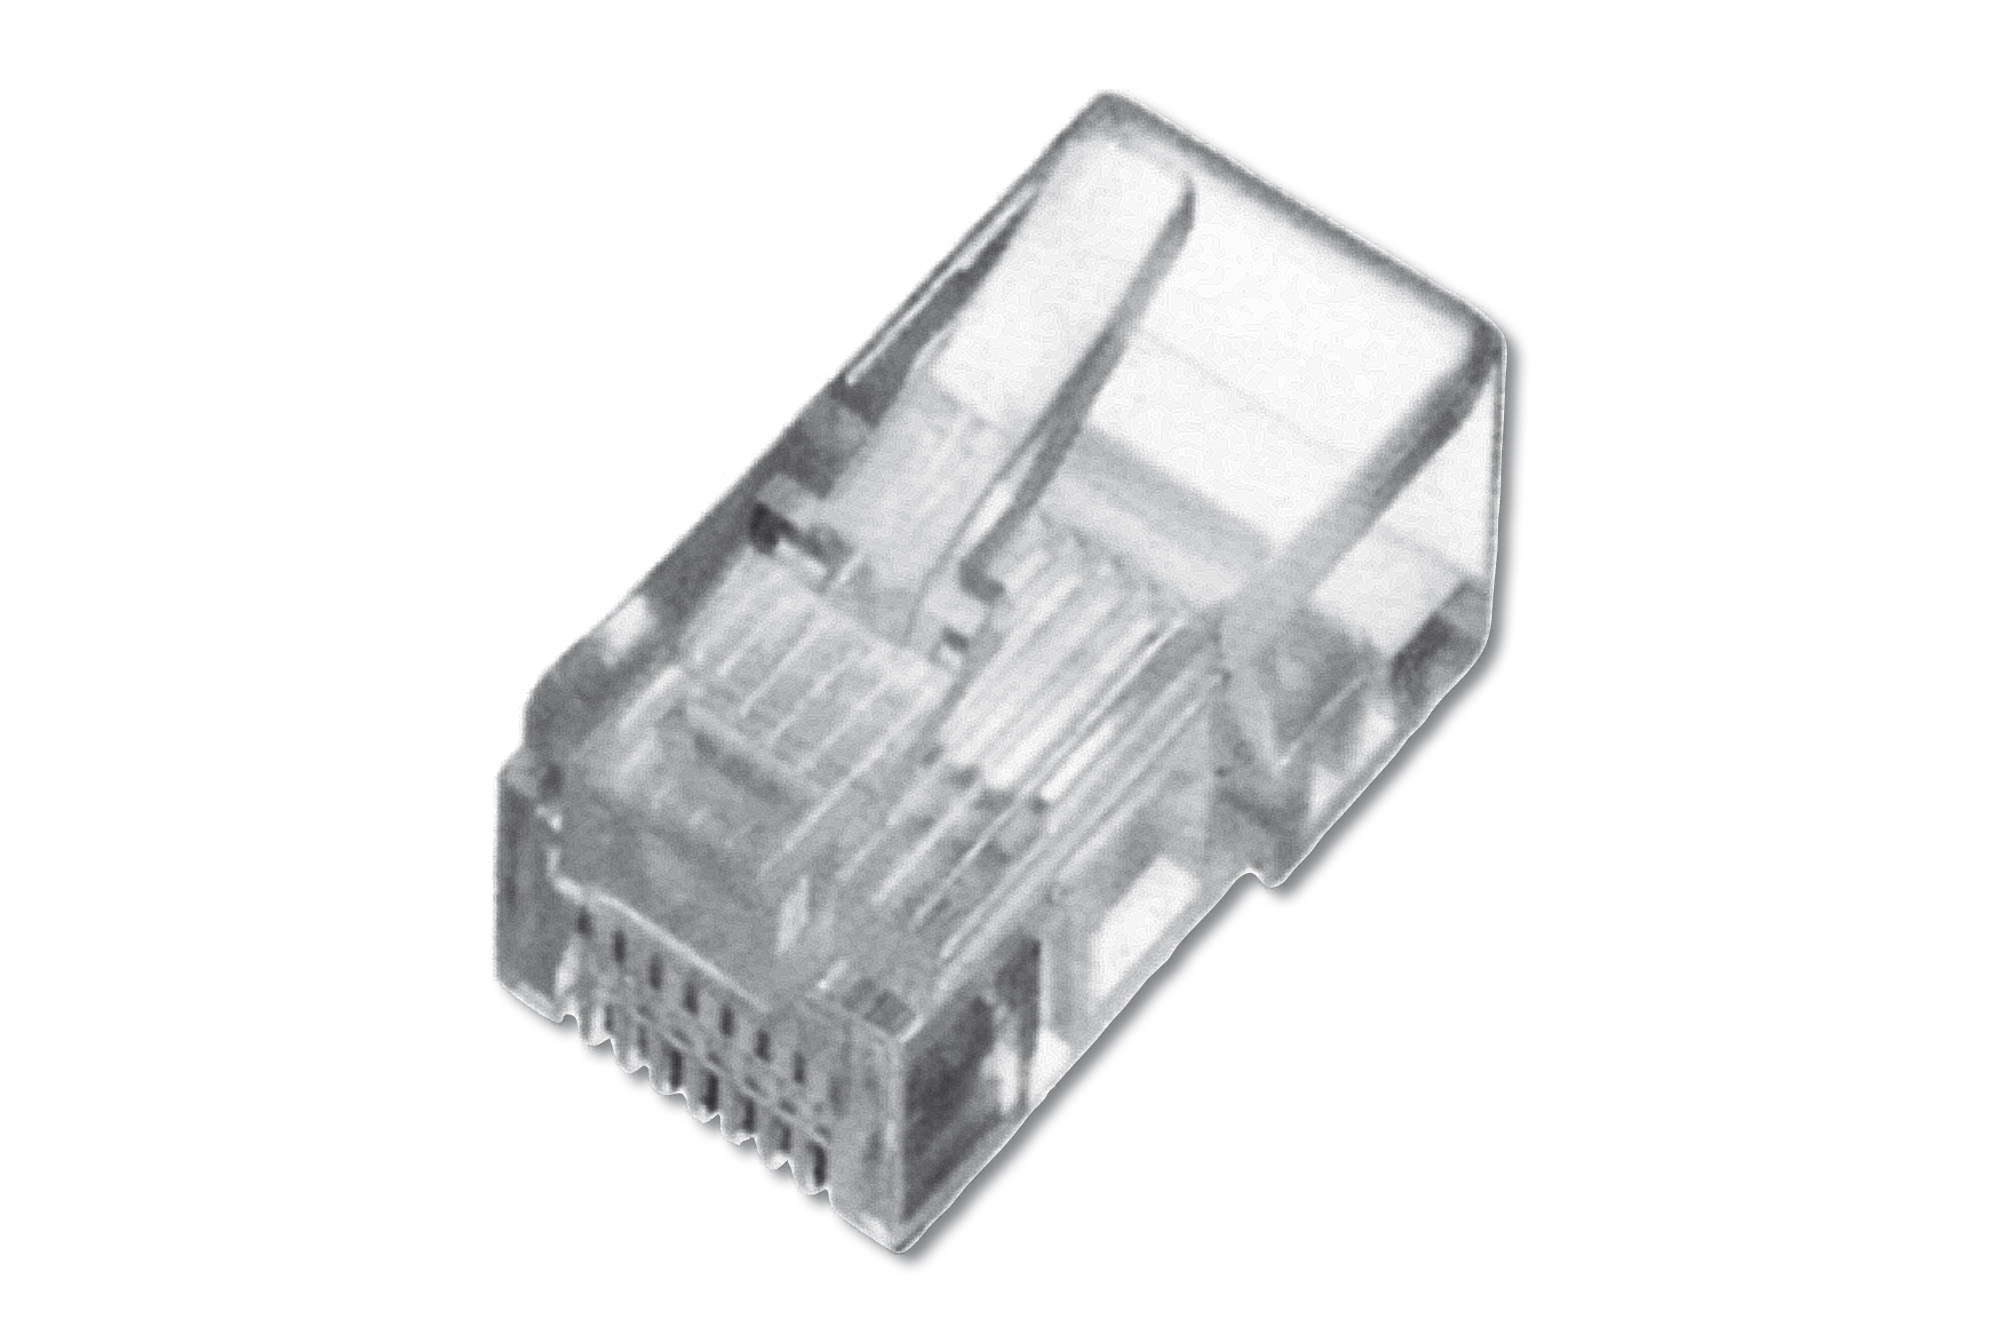 Digitus A-MO 8/8 SRS wire connector RJ-45 8P8C